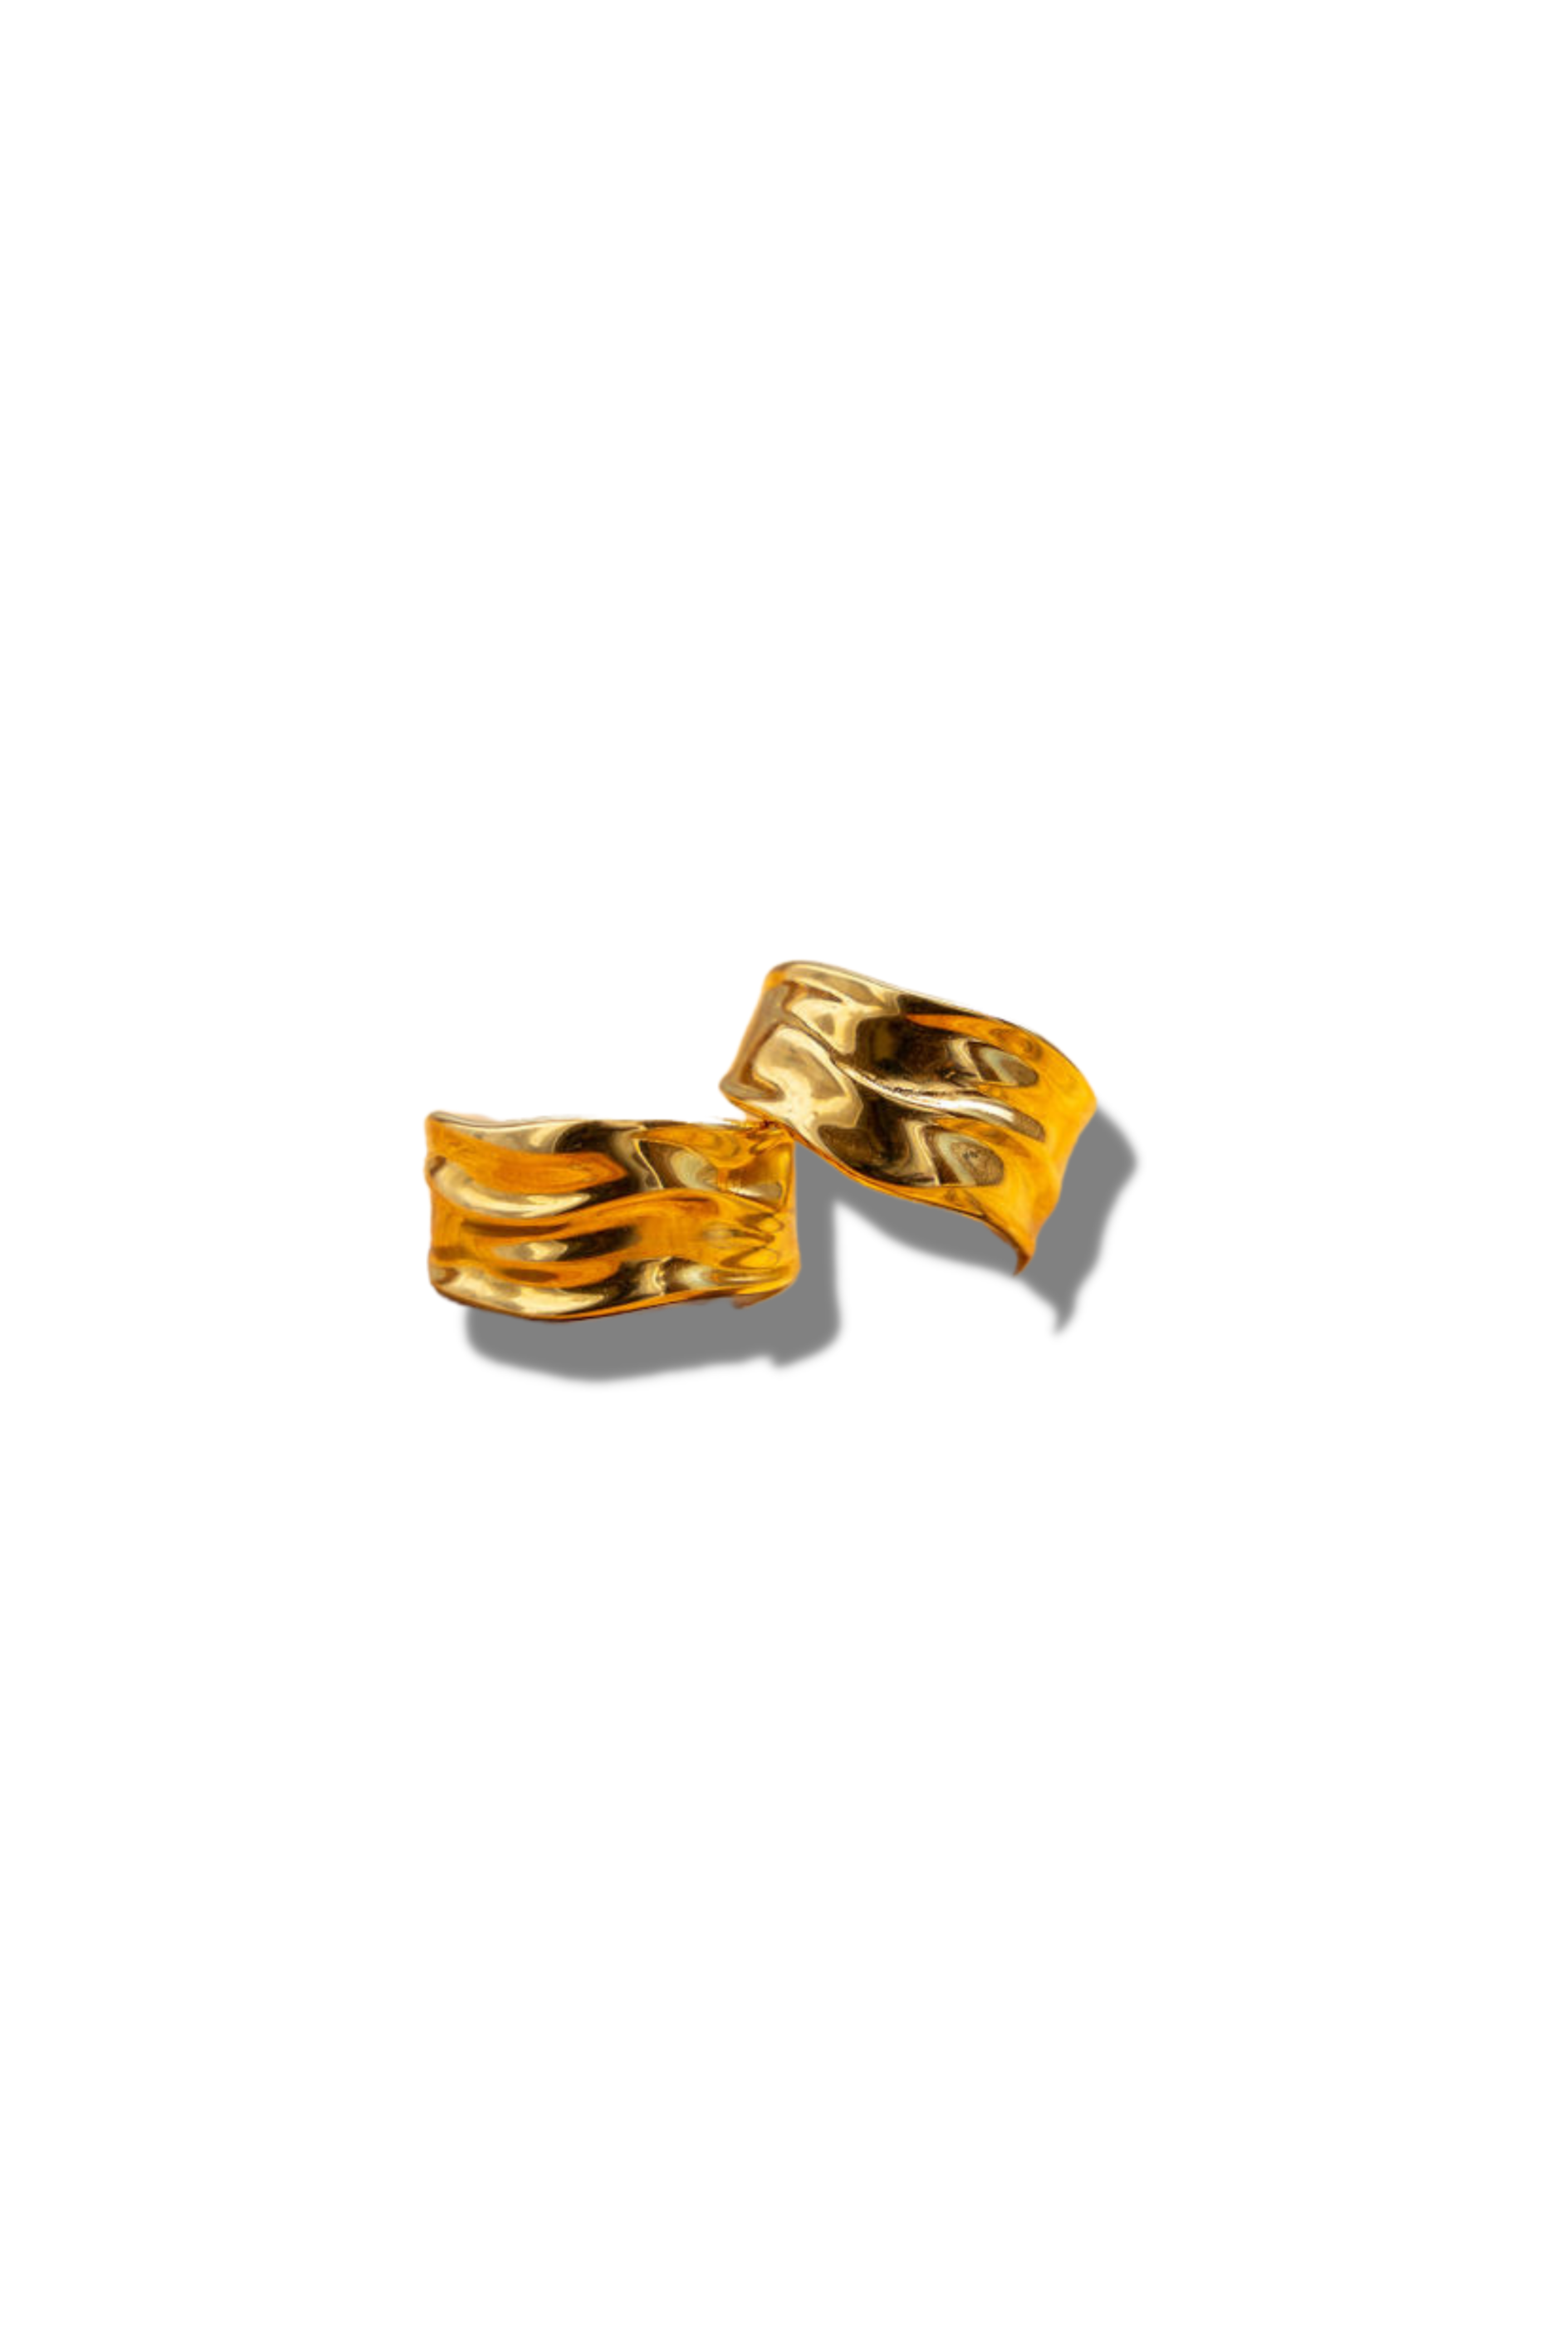 Two 18k gold molten rings. Ella Lava Ring 2.0 by E's Element.